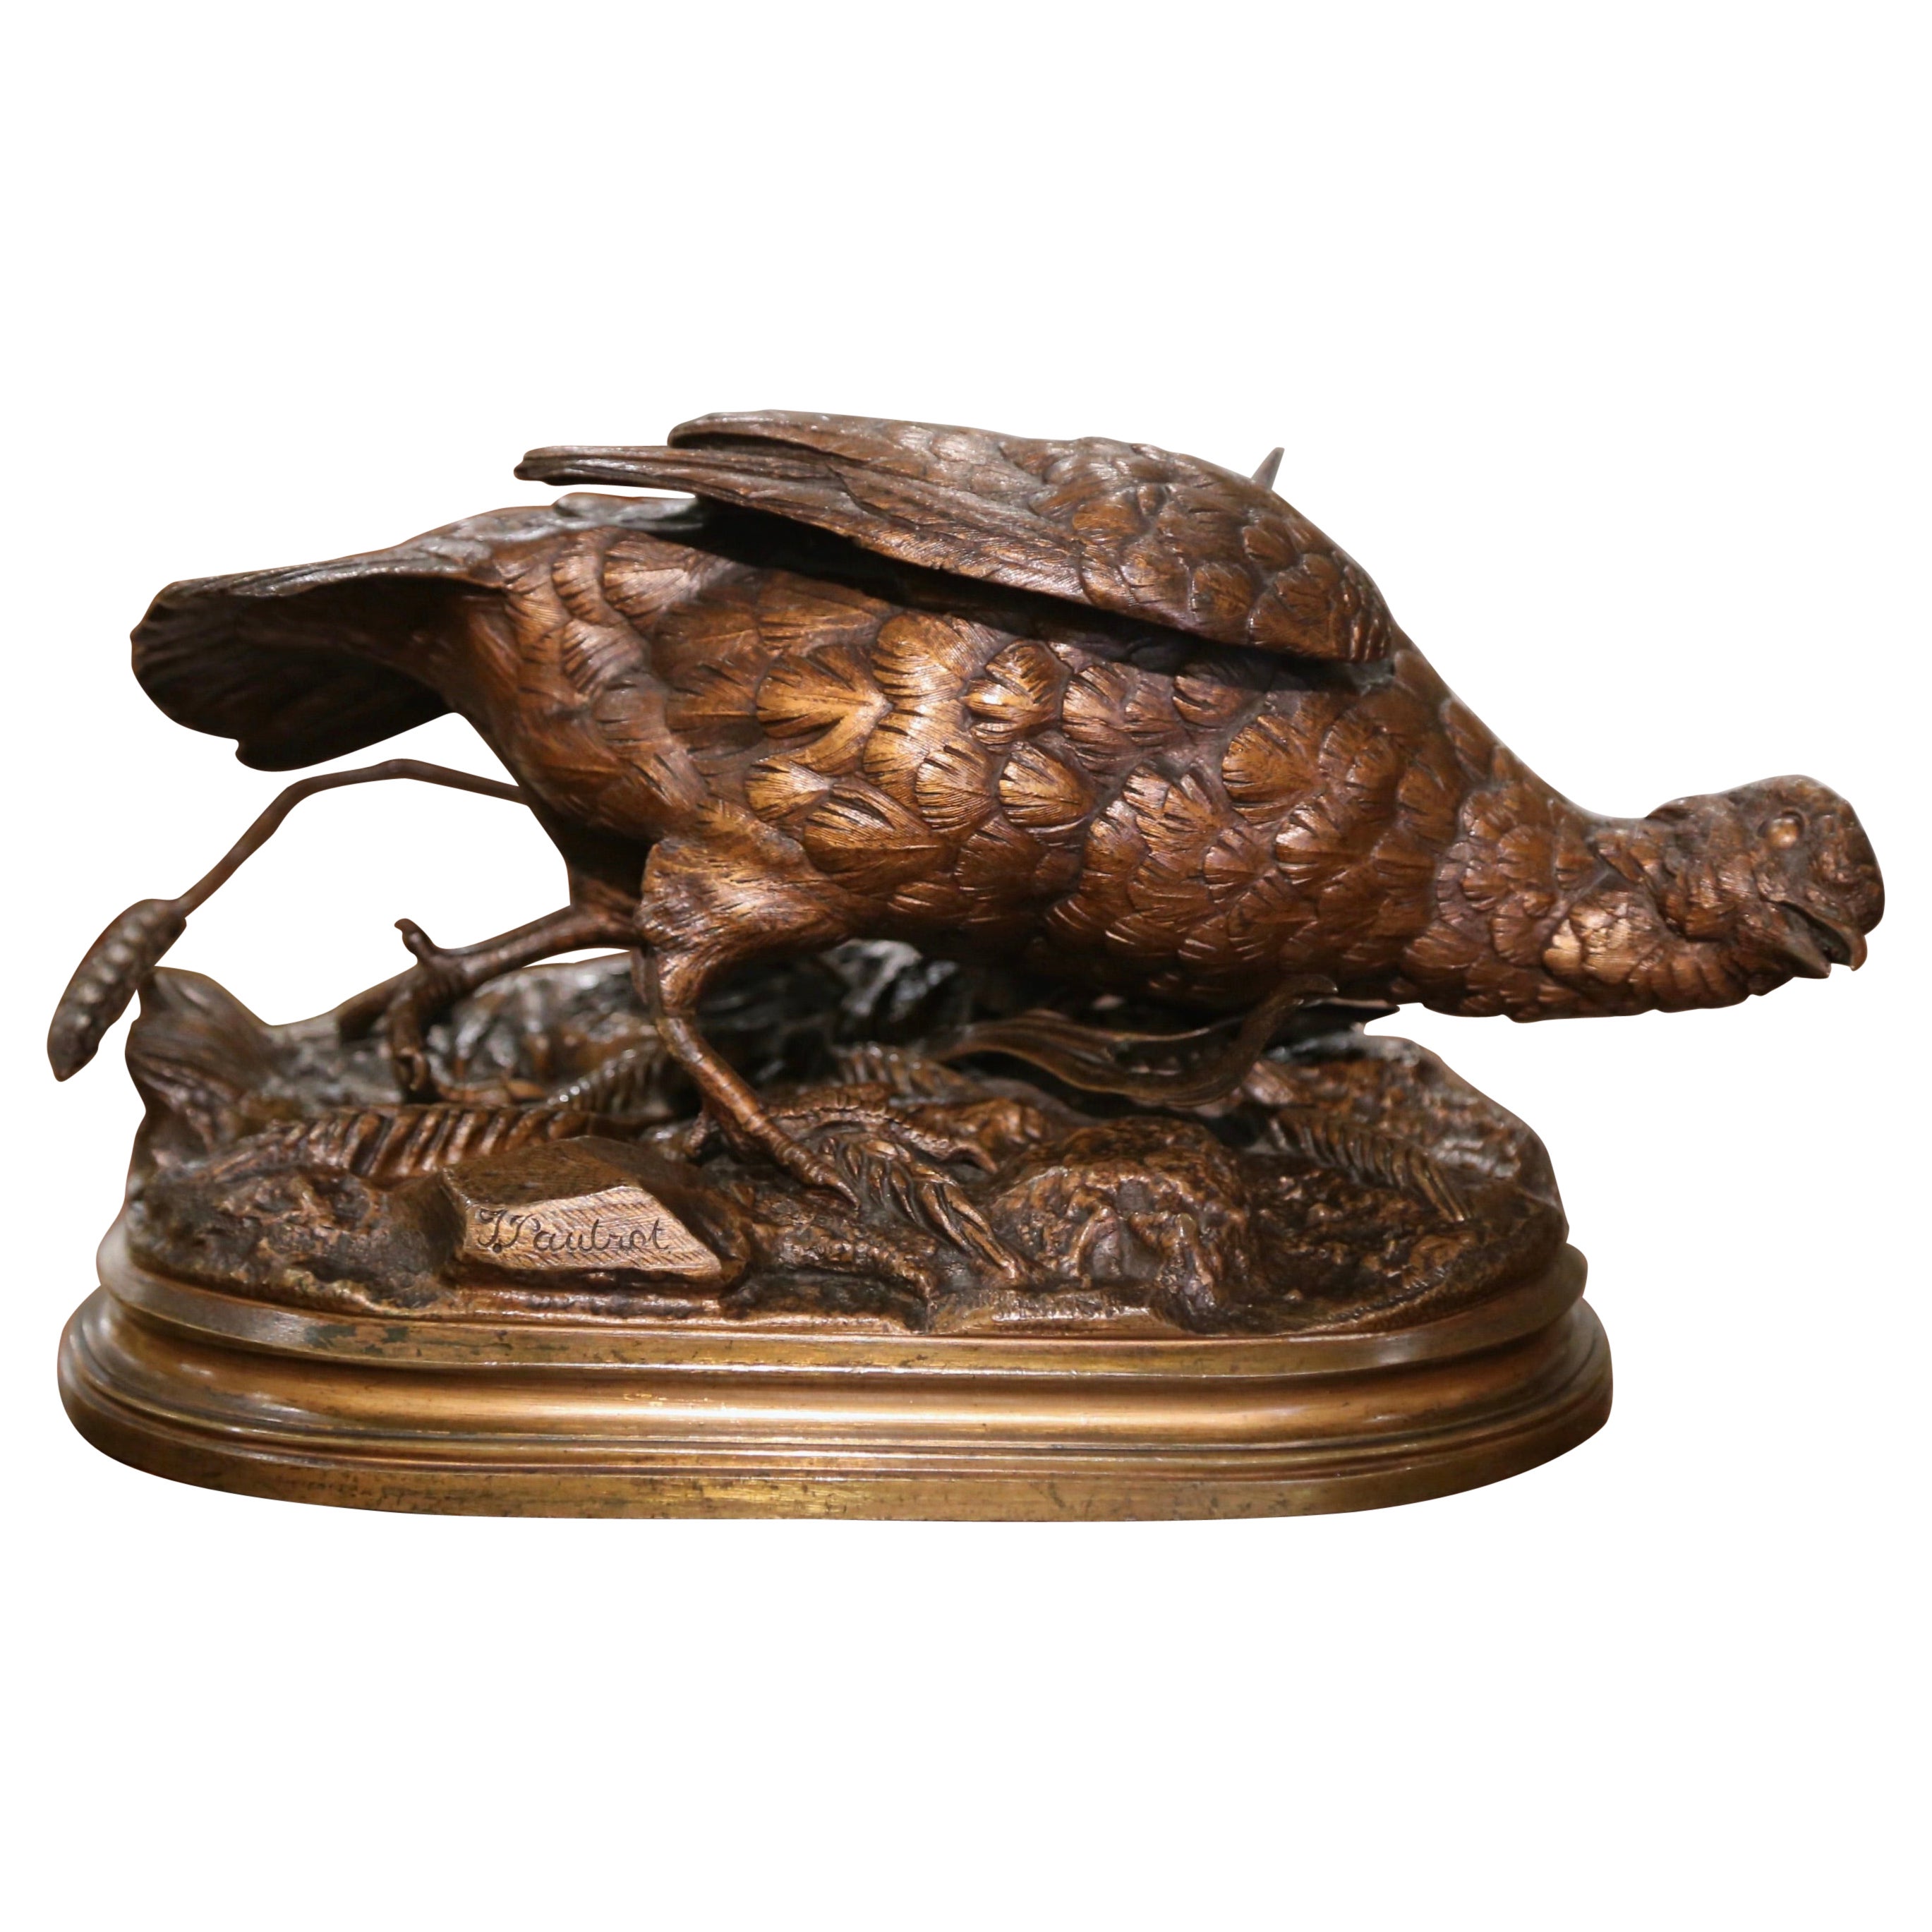 19th Century French Patinated Bronze Pheasant Sculpture Signed F. Pautrot